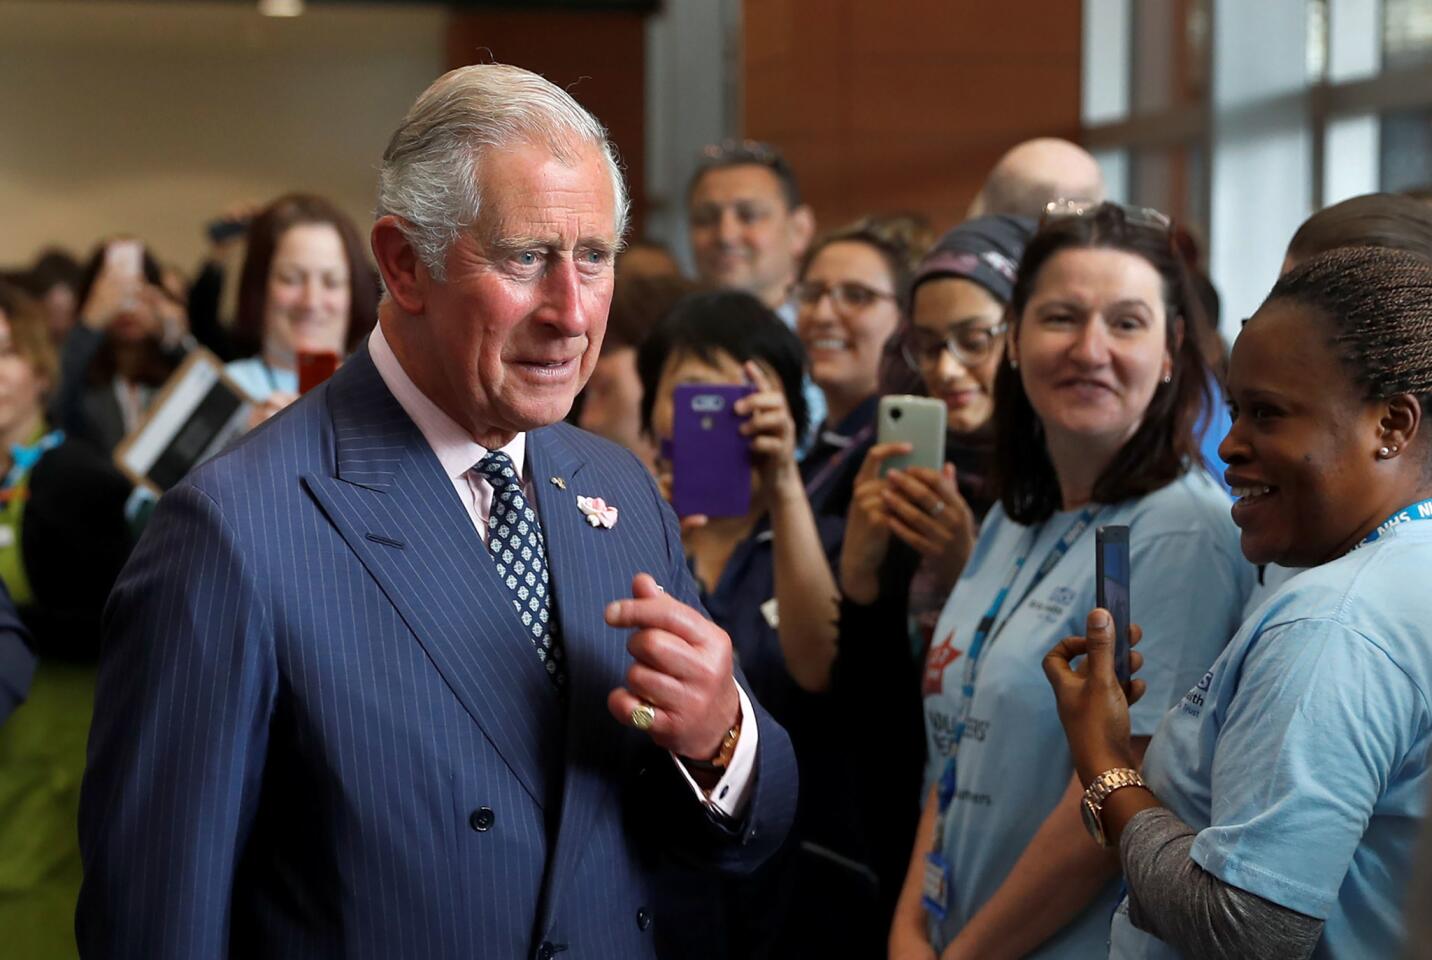 Charles, Prince of Wales, talks to staff during a visit to the Royal London Hospital on Tuesday, following the Saturday night terrorist attack in London.